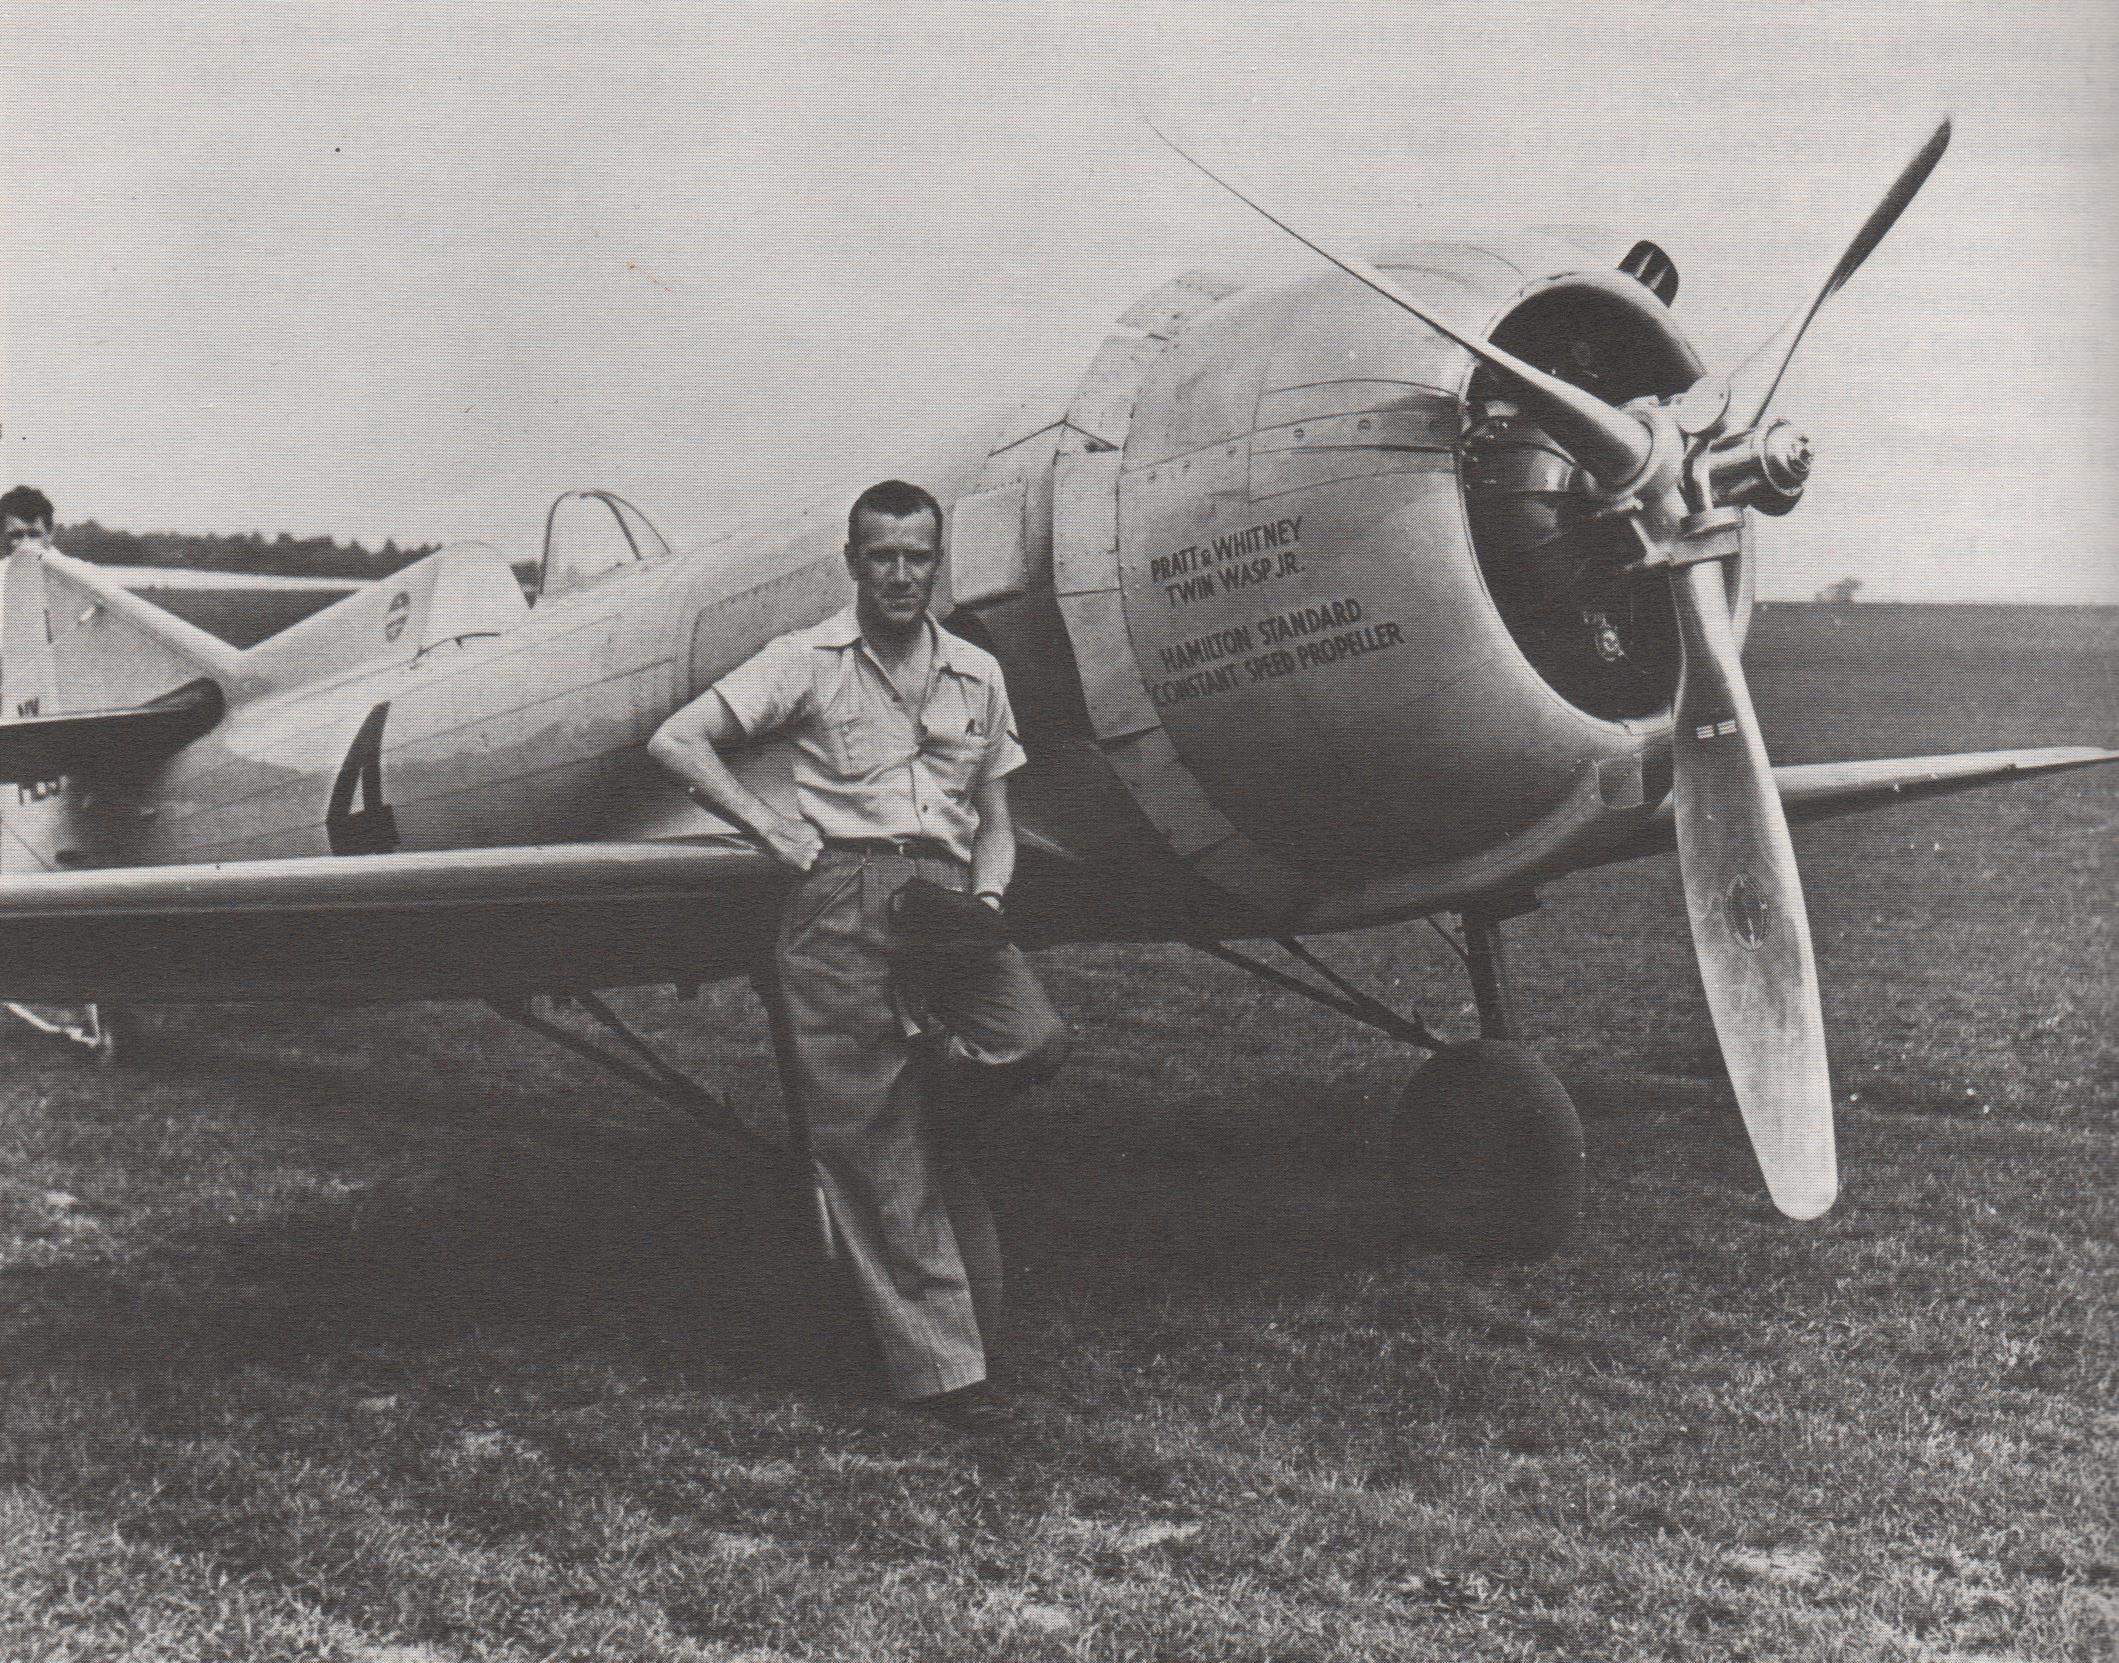 Earl Ortman with the Keith Rider R 3 1935